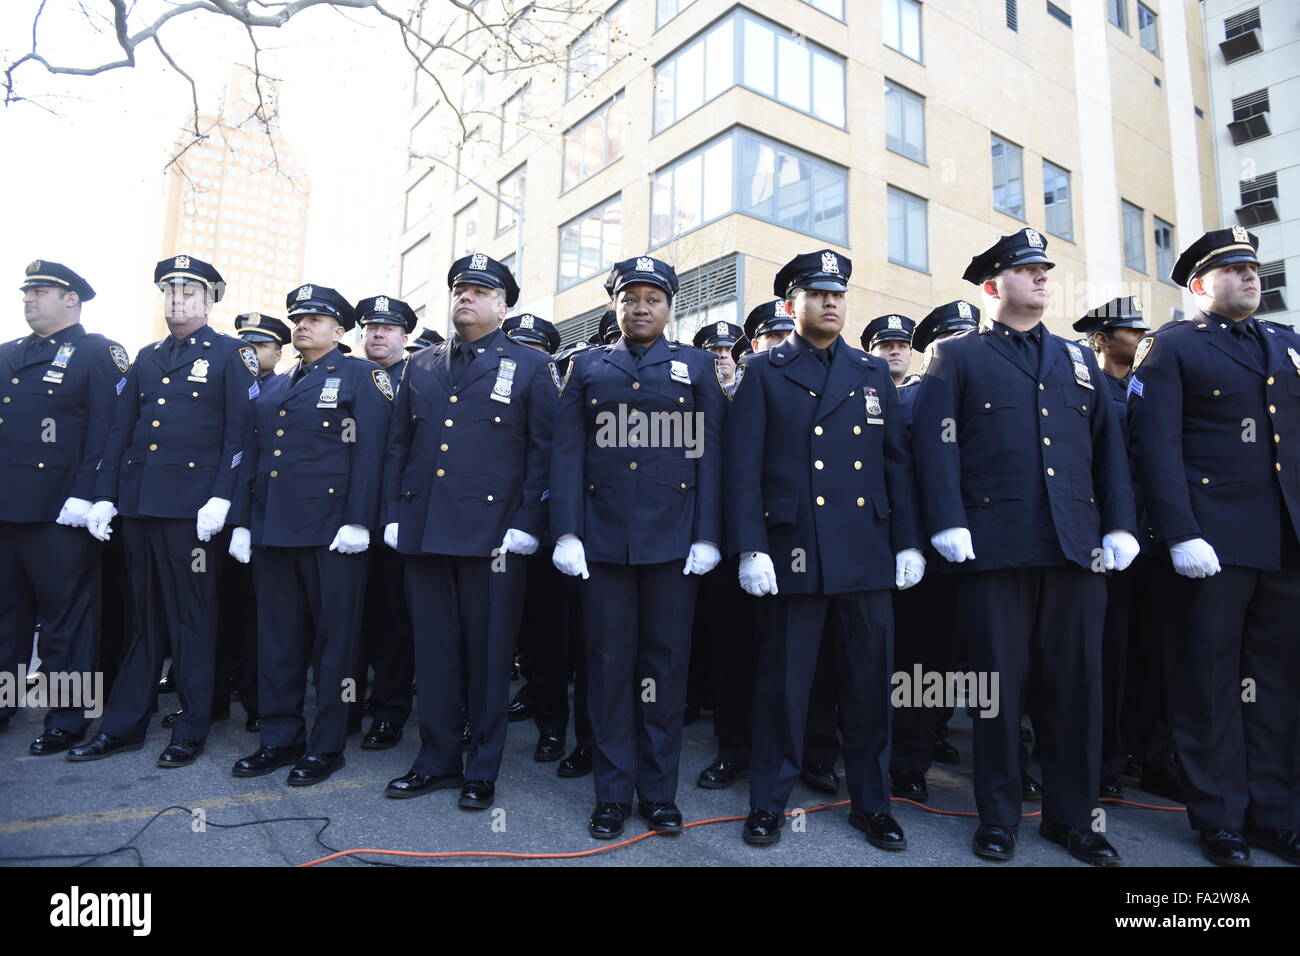 New York City, United States. 20th Dec, 2015. NYPD officers in dress uniform  stand at attention at 84th precinct. NYC mayor Bill de Blasio joined the  families of slain NYPD officers Wenjian